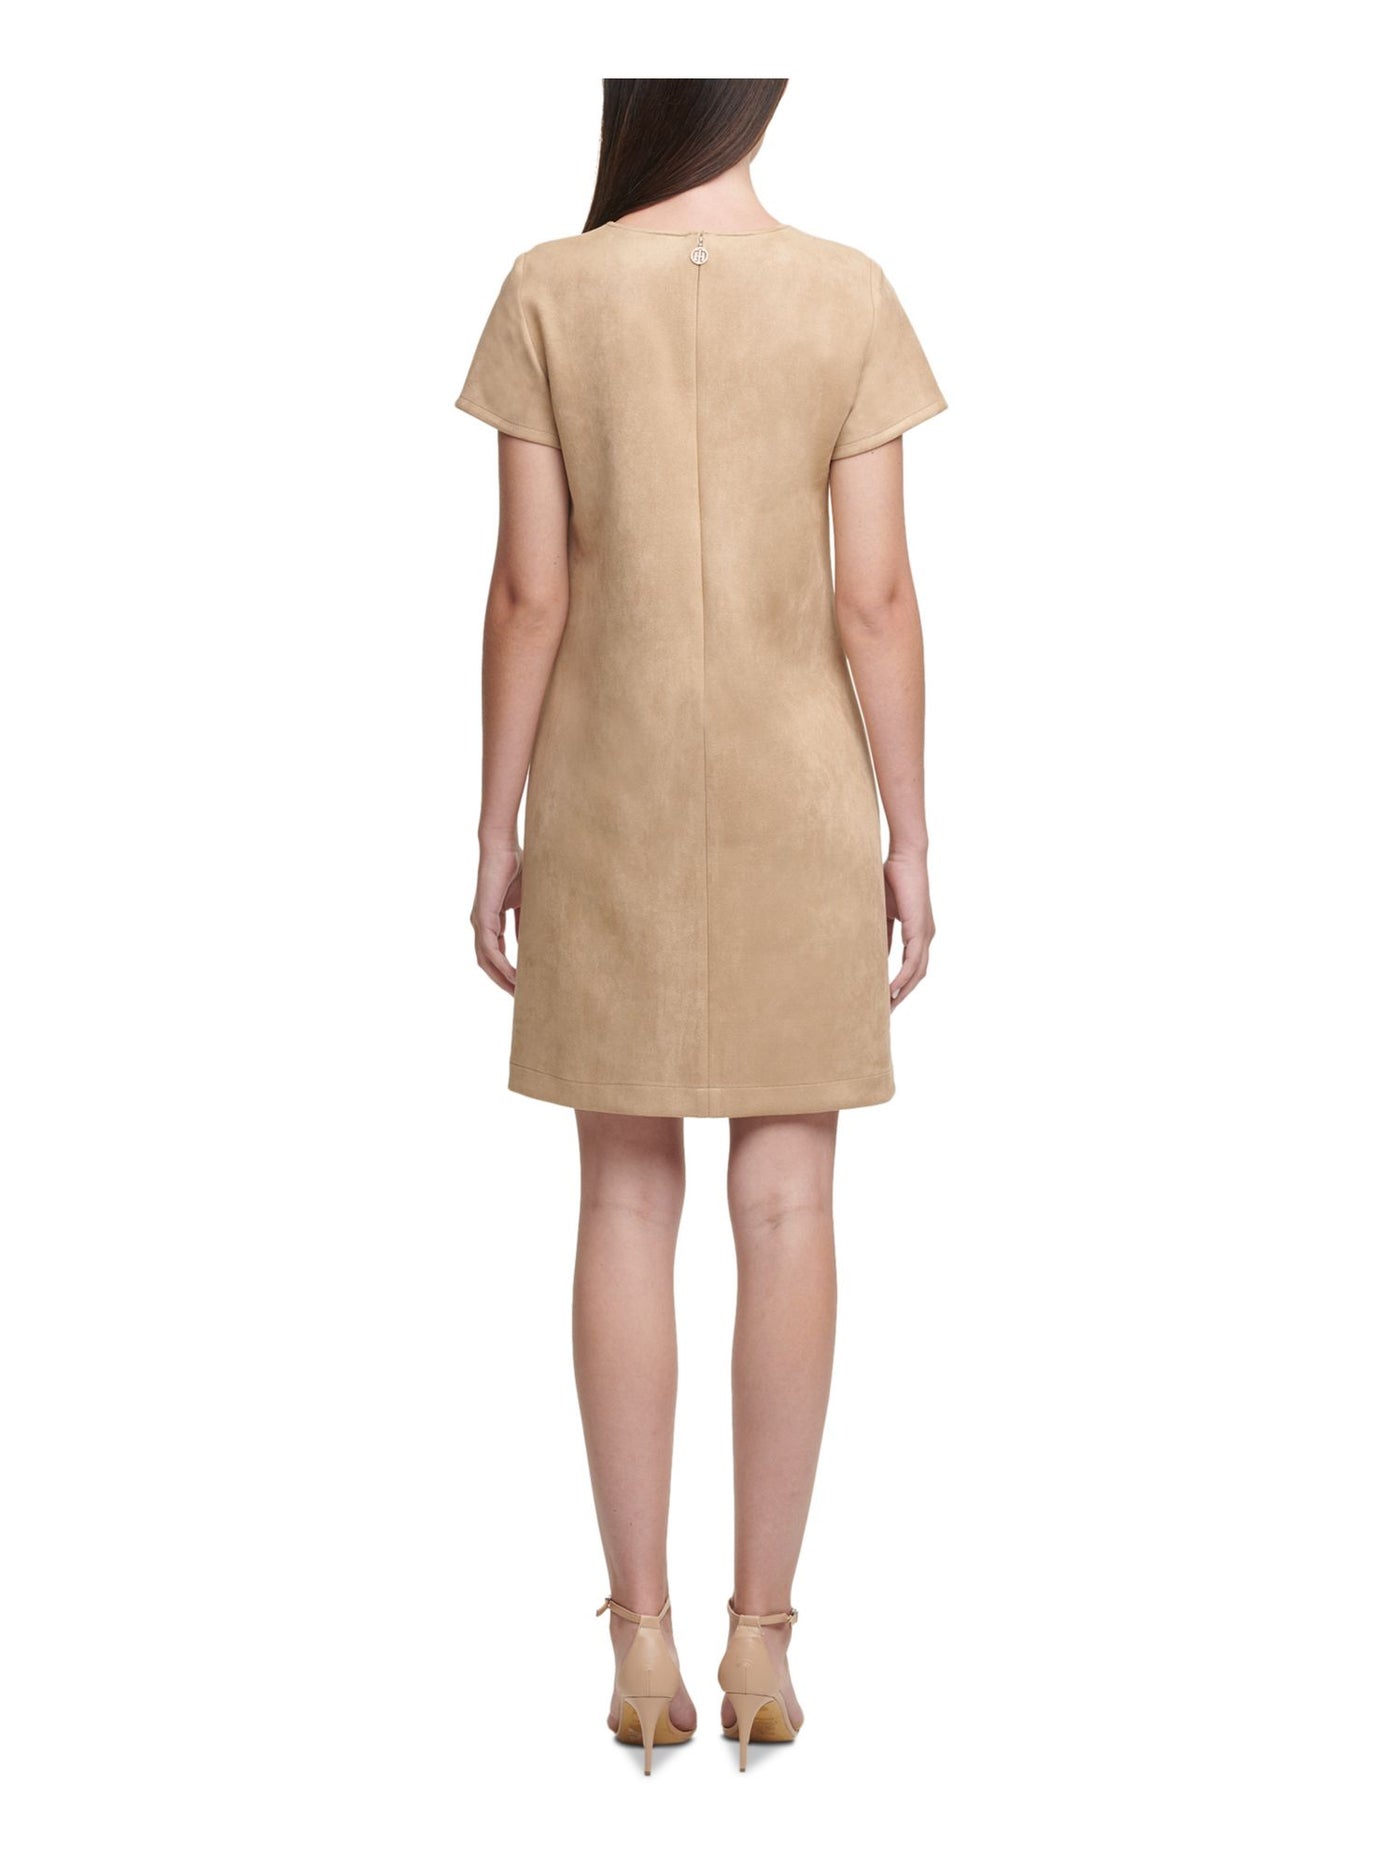 TOMMY HILFIGER Womens Beige Faux Suede Short Sleeve Jewel Neck Above The Knee Shift Dress 6